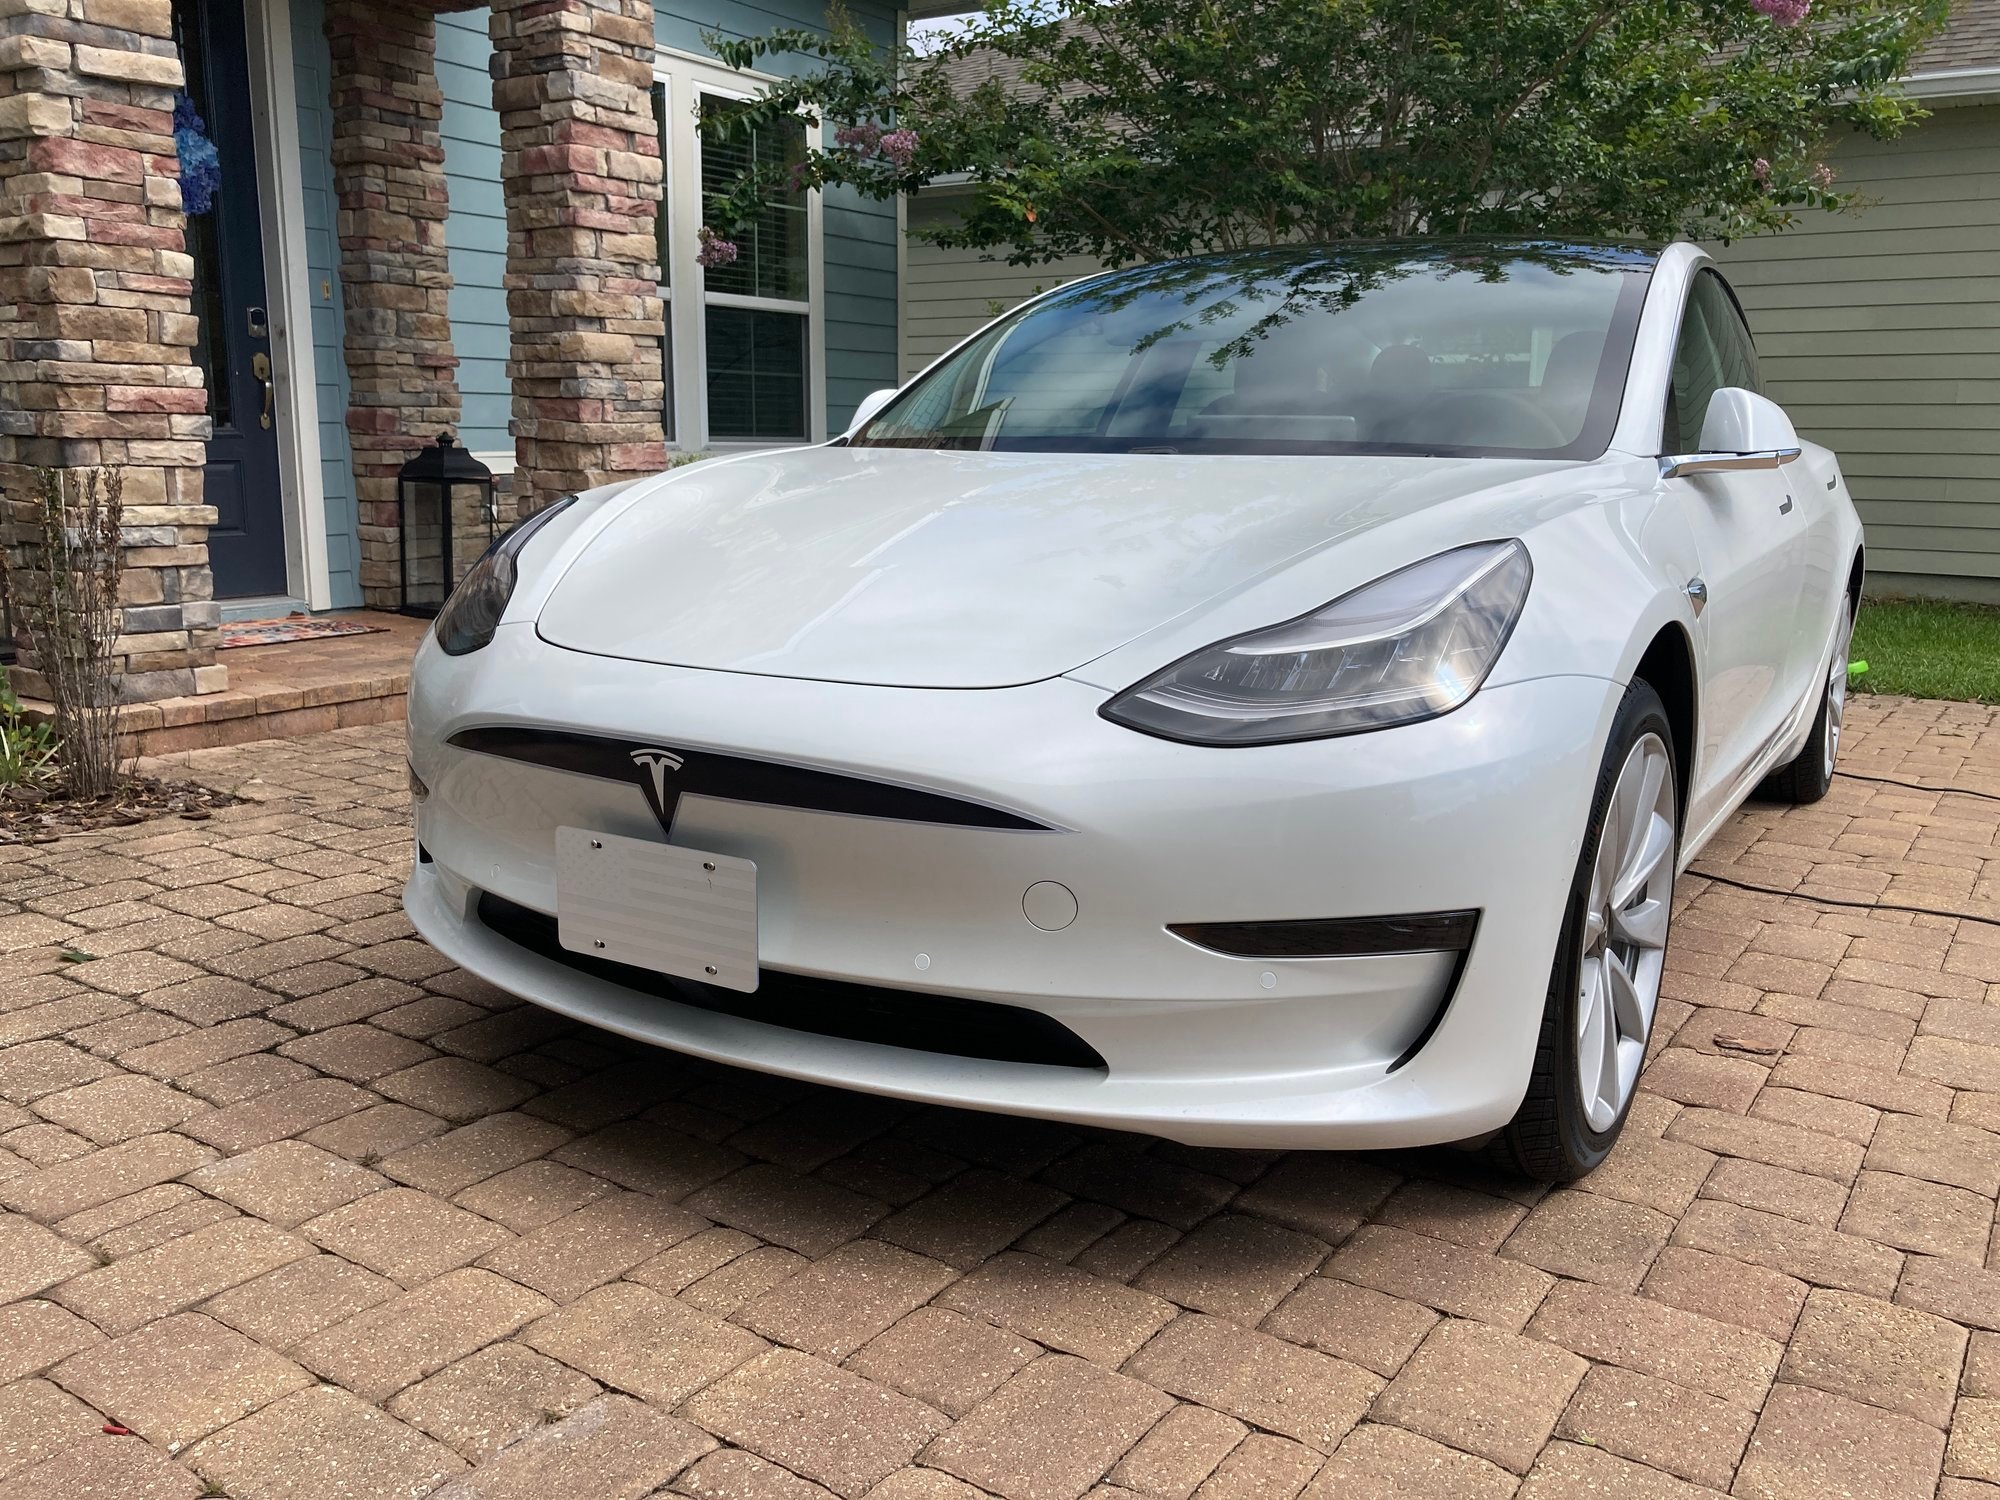 Model 3 grill and license plate | Tesla Motors Club